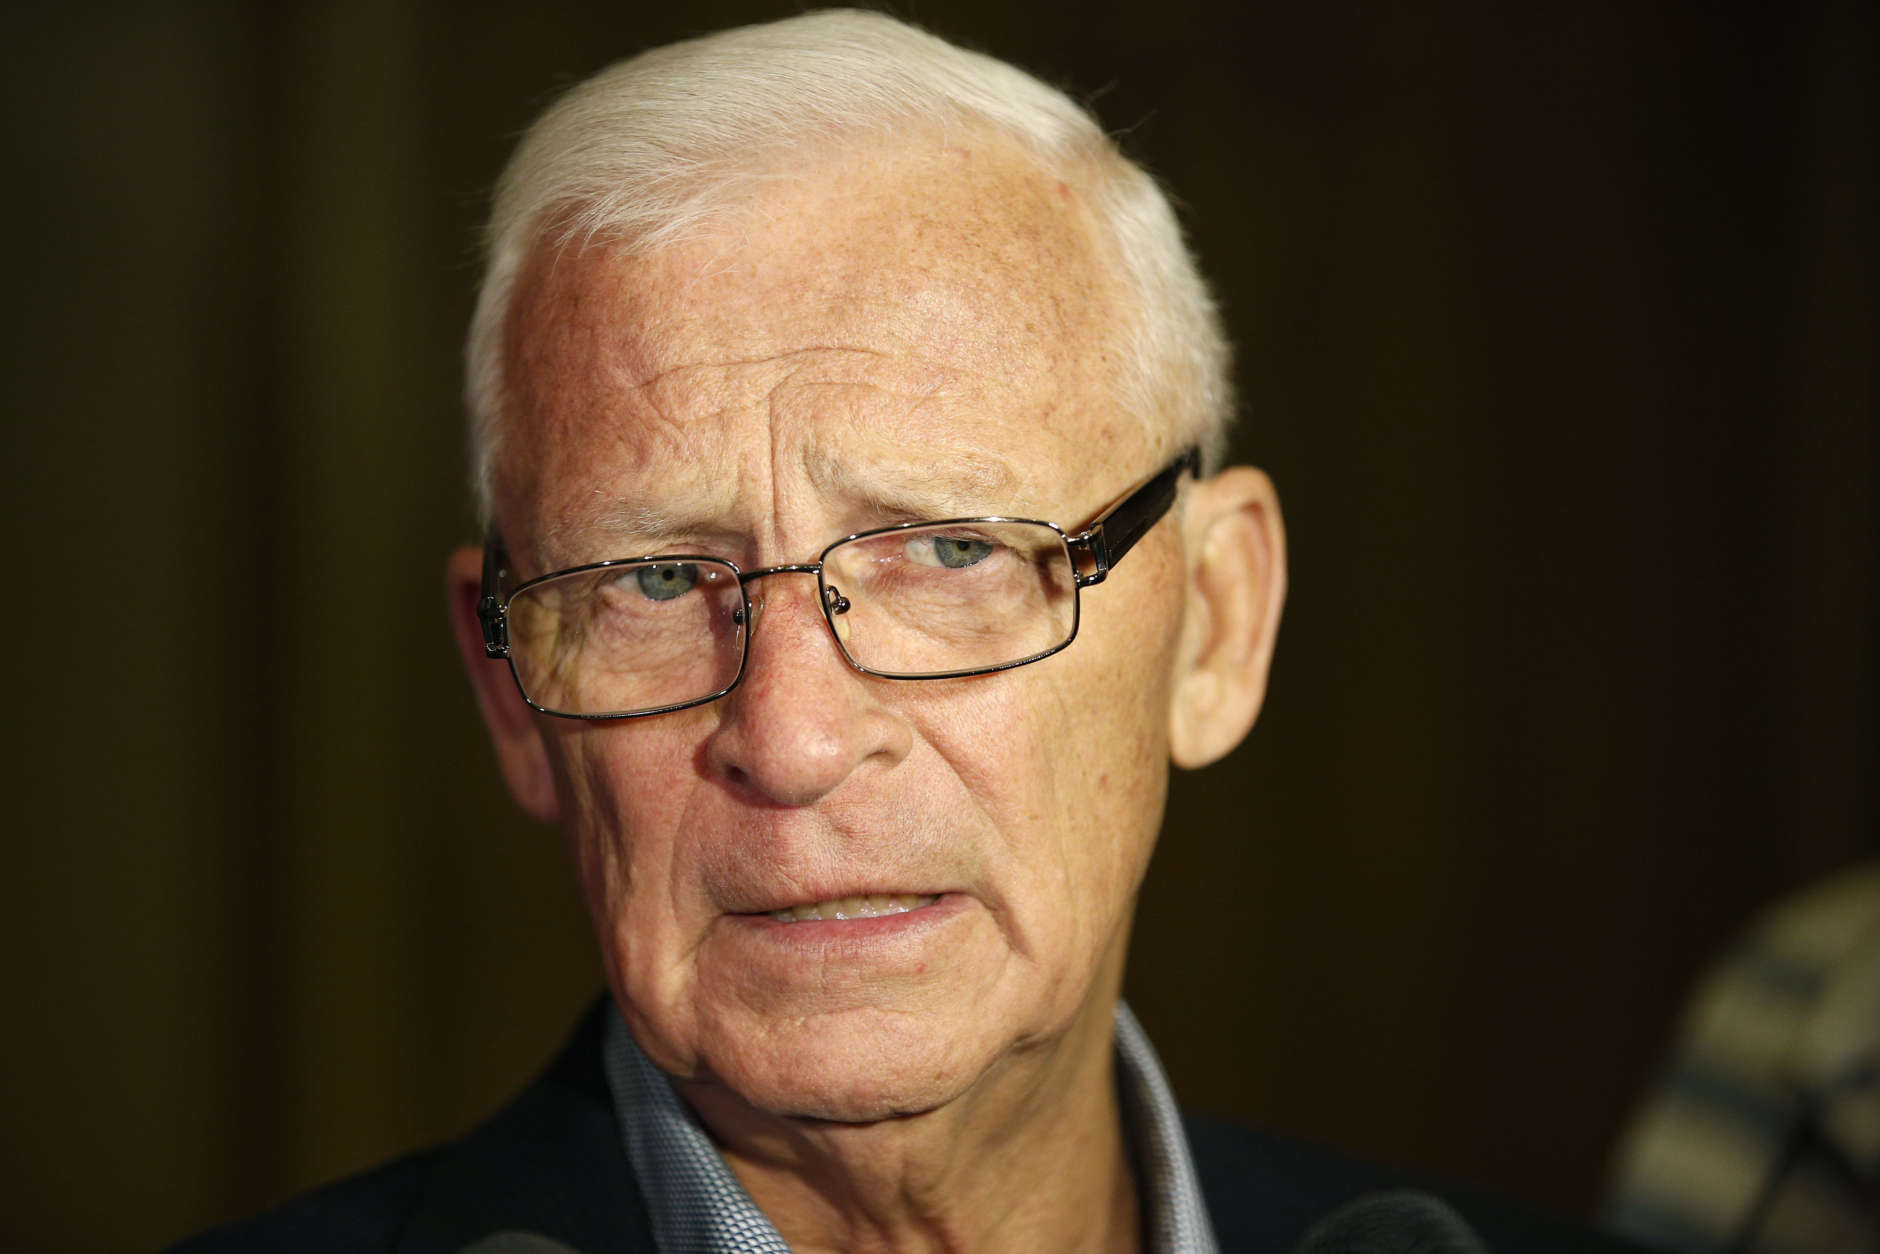 FILE - In this June 23, 2015, file photo, Ottawa Senators then-general manager Bryan Murray speaks with reporters after a meeting of NHL hockey GMs in Las Vegas. While the NHL holds its annual month-long “Hockey Fights Cancer” initiative, the Senators are a reminder that the fight doesn’t stop. The Senators have been particularly hard hit by the disease as assistant coach Mark Reeds died last year at 55, former general manager Murray continues his fight against terminal colon cancer and public-address announcer “Stuntman” Stu Schwartz battled leukemia. Recently, goaltender Craig Anderson’s wife, Nicholle, was diagnosed with cancer. (AP Photo/John Locher, File)